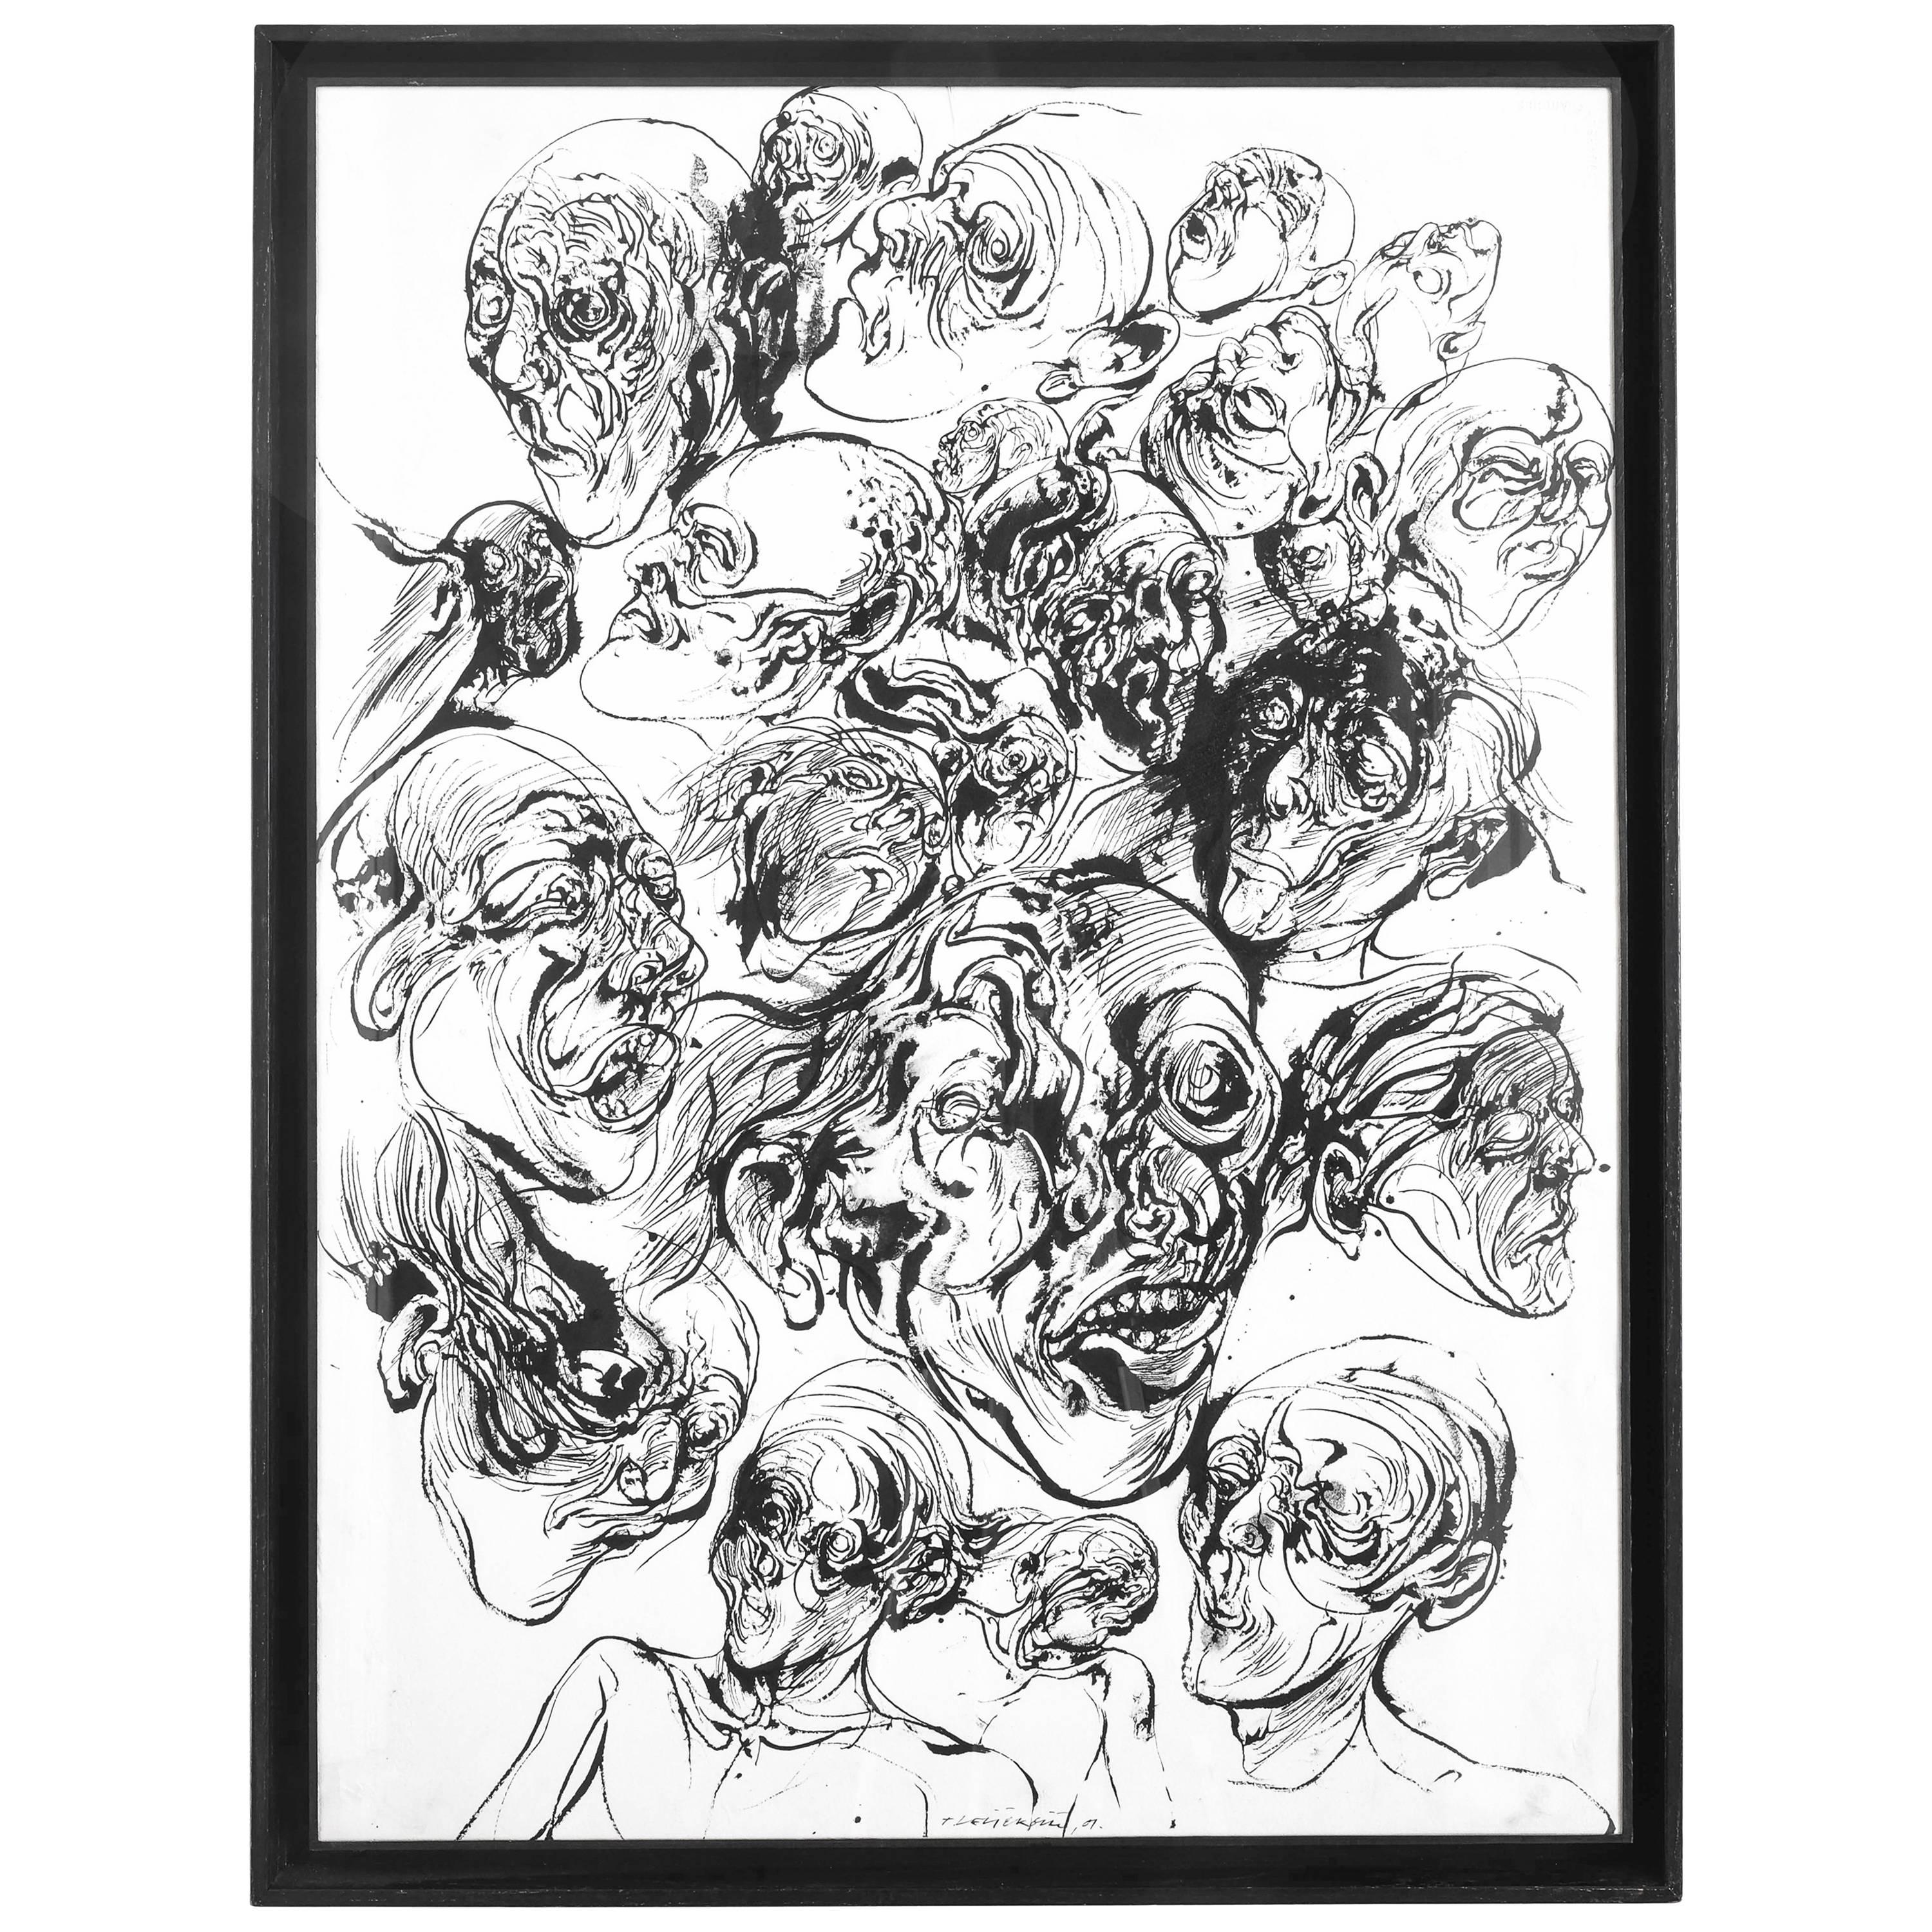 Vladimir Velickovic, Faces, Ink on Paper 2001 For Sale